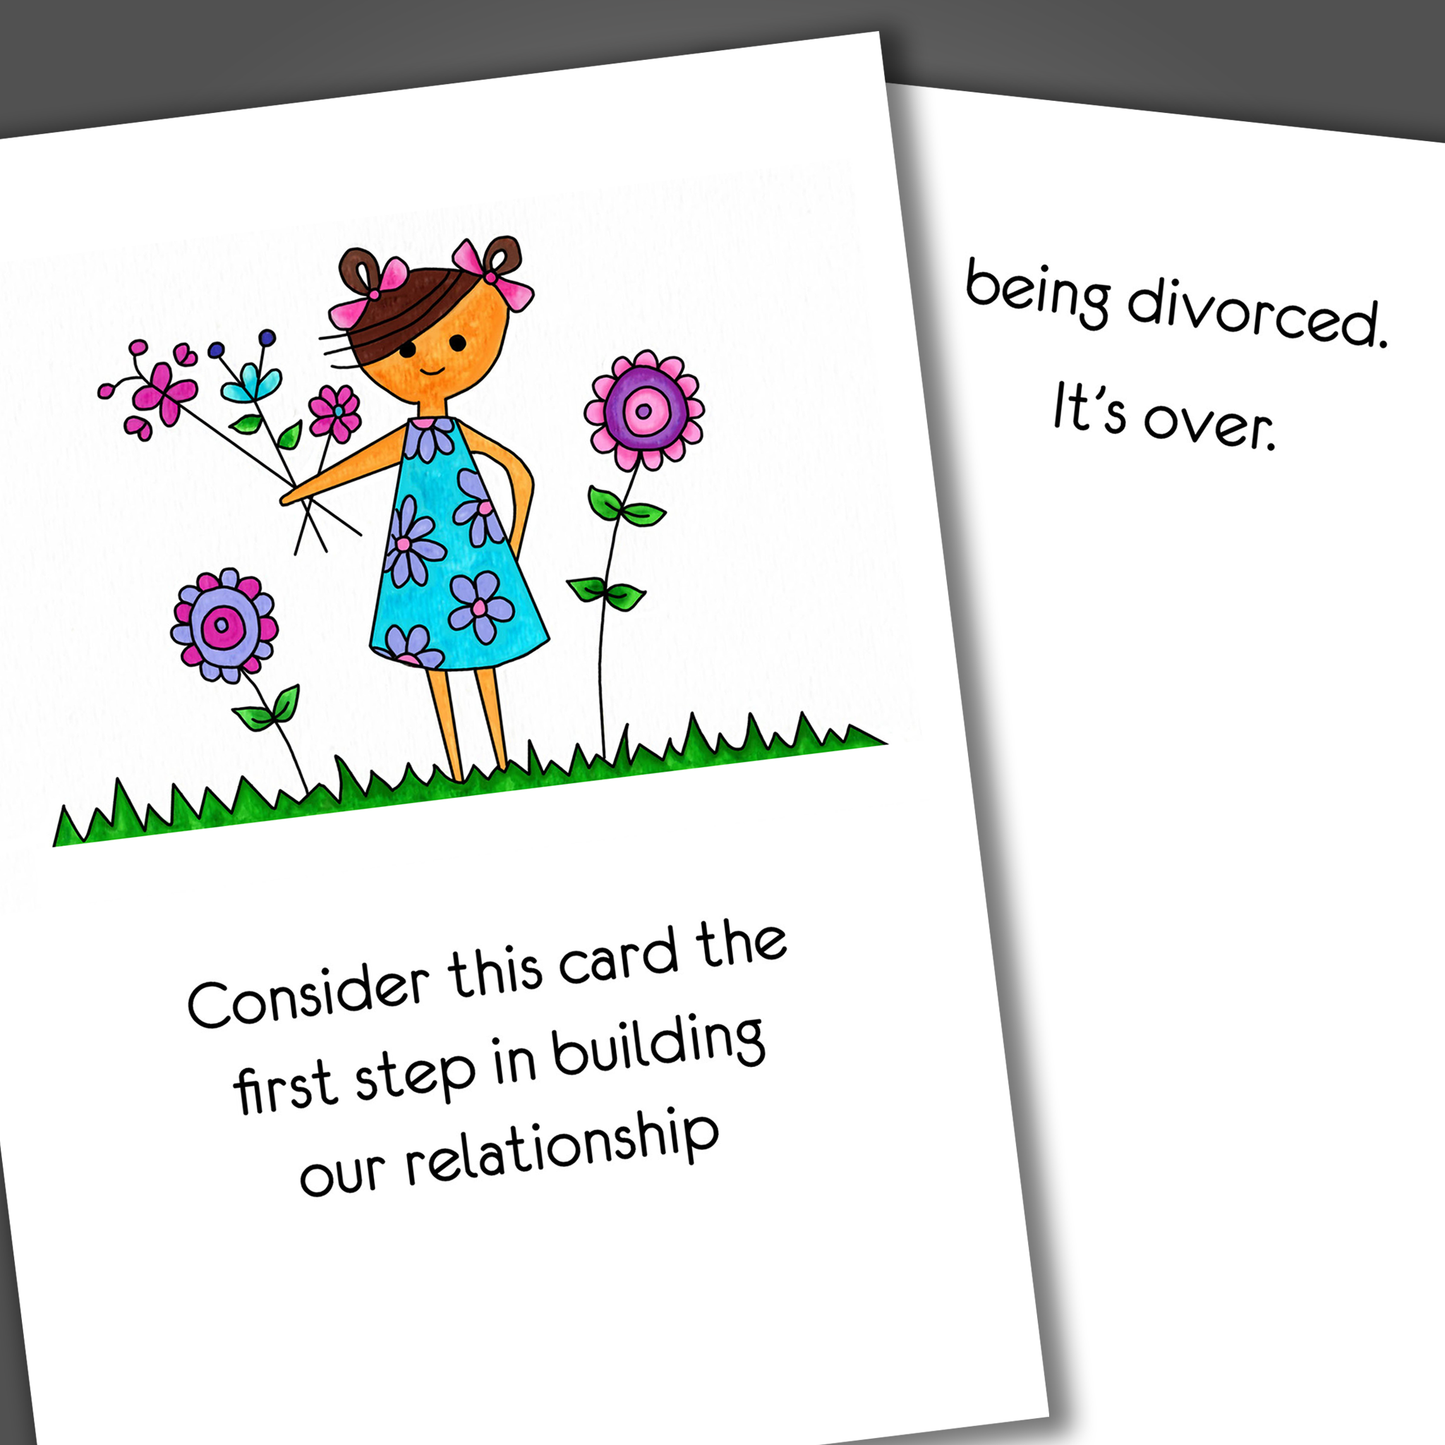 Funny divorce or breakup card with a girl holding flowers on the front of the card. Inside the card is a joke that says consider this our first step, in being divorced, it's over!